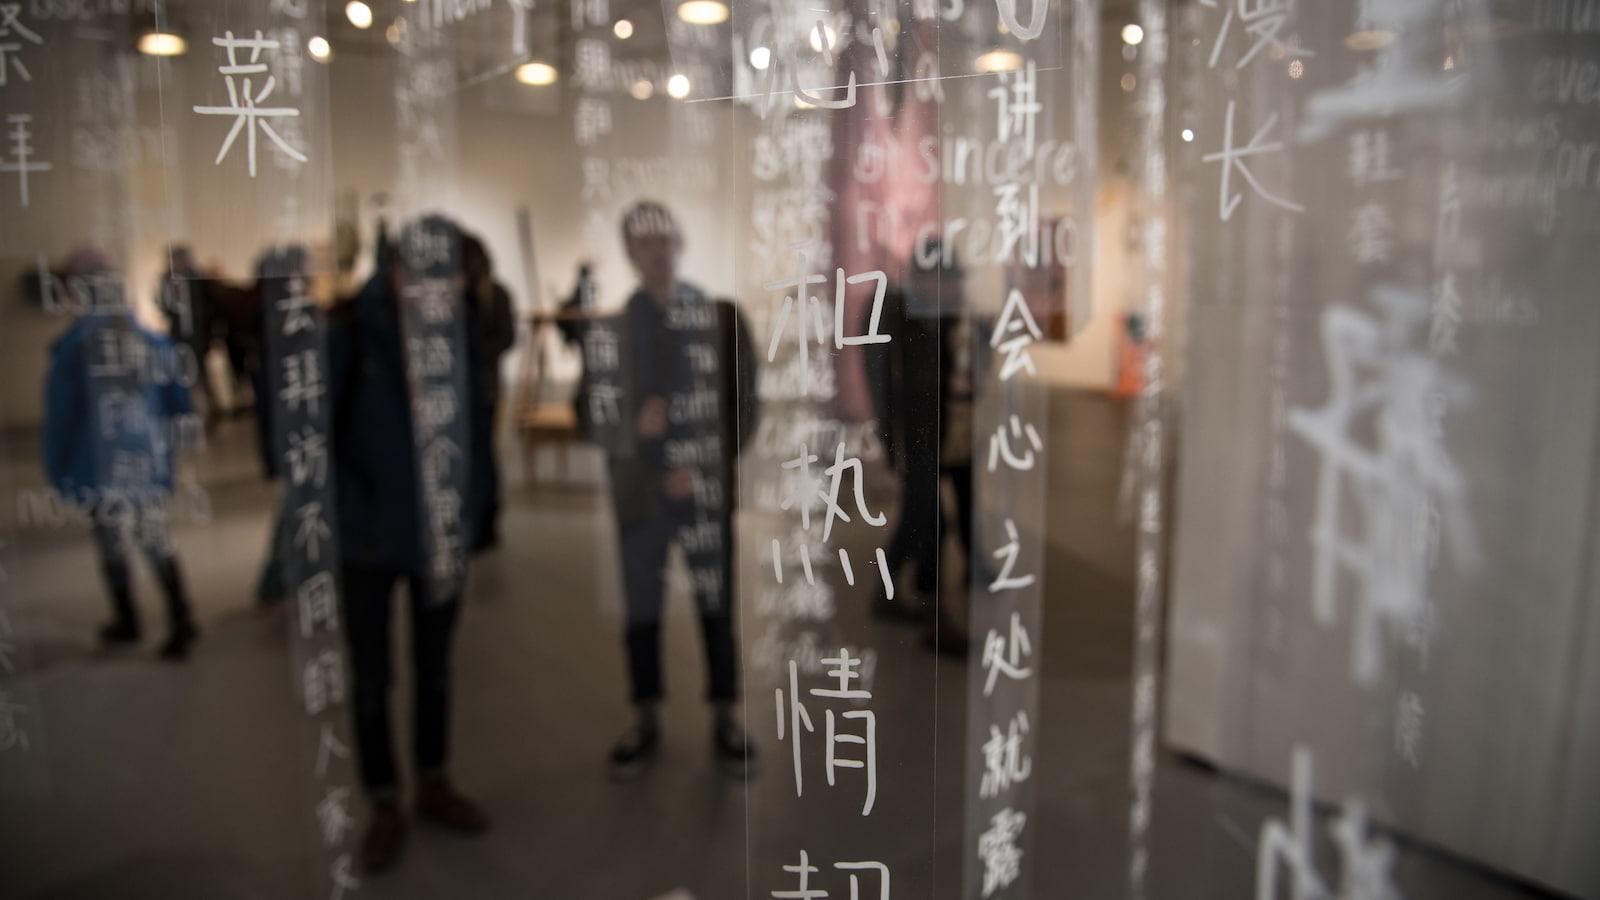 Students behind clear, long strips with Chinese writing in white letters.